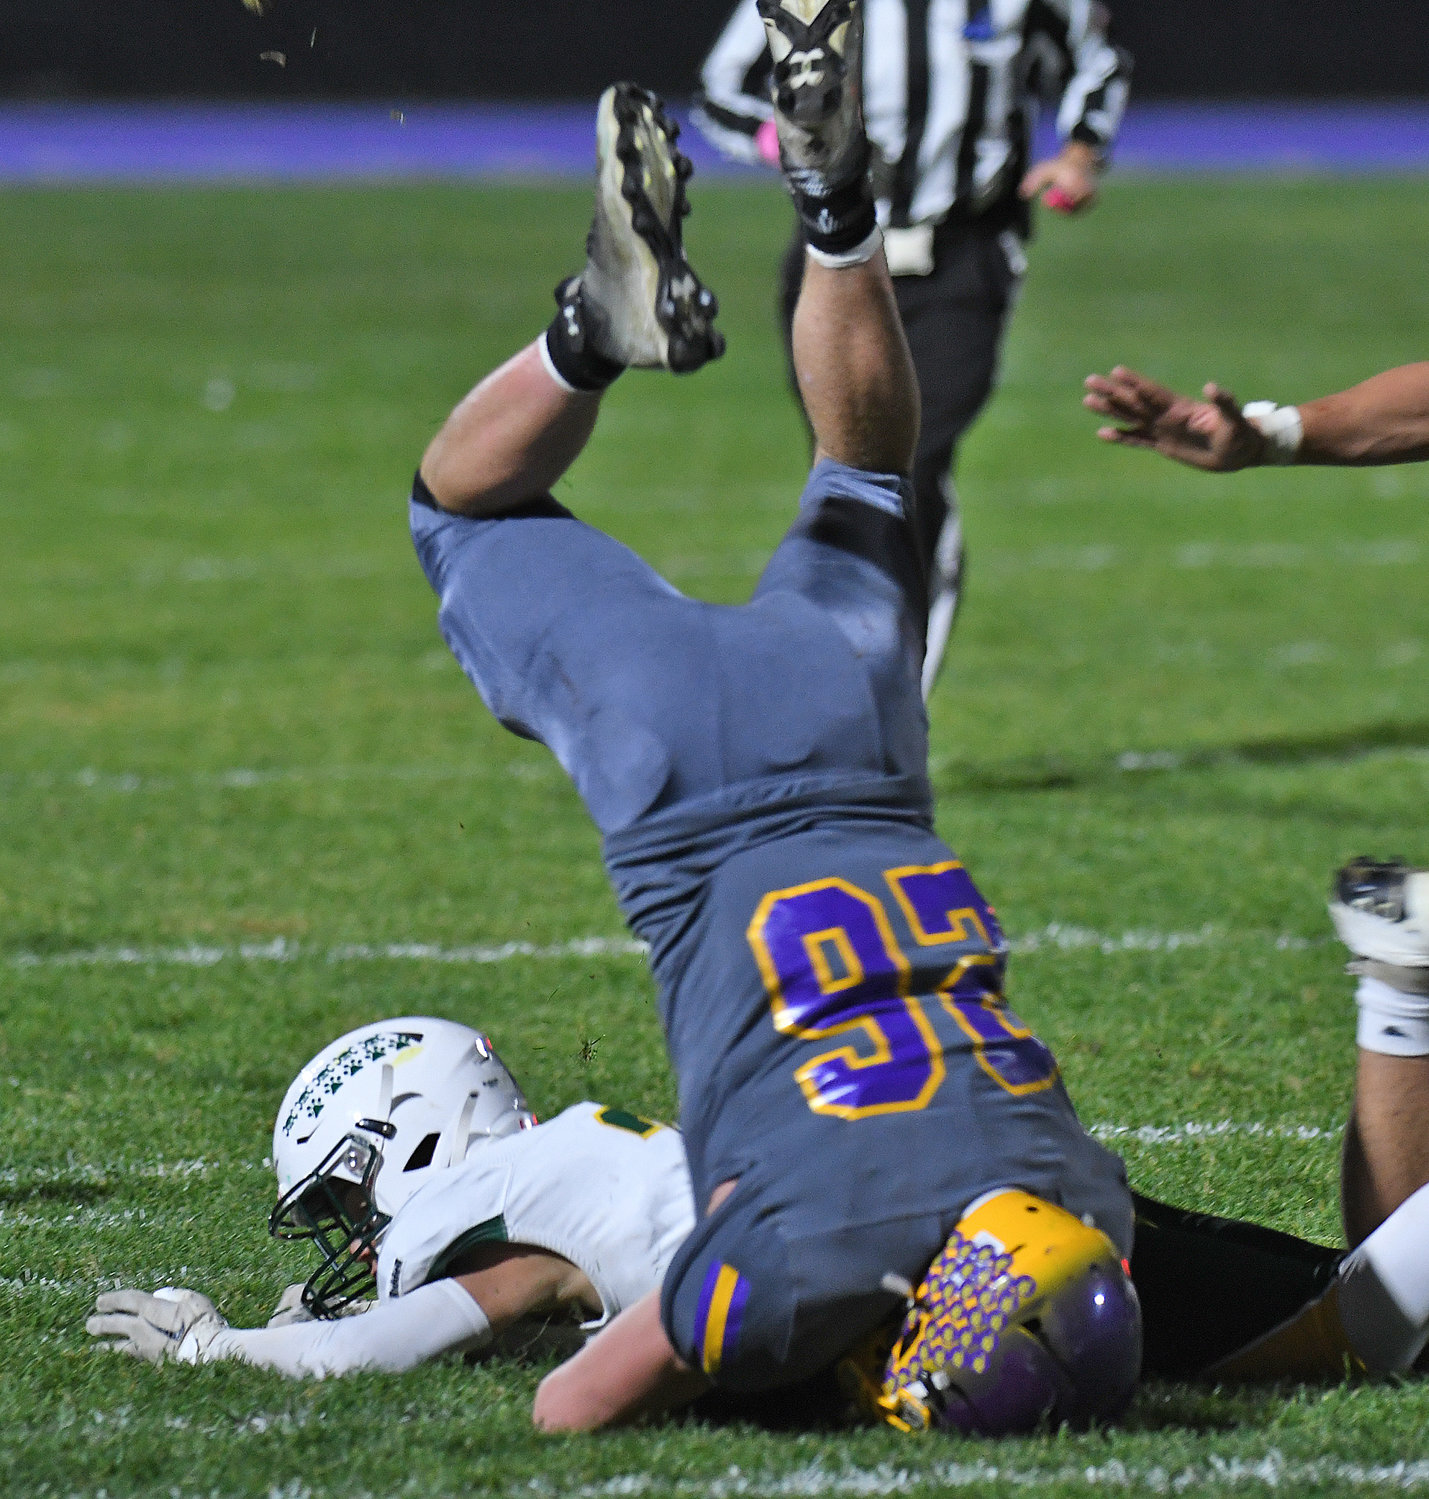 Holland Patent running back Jordan Koenig gets upended by Adirondack defensive back Braden White Saturday night at Holland Patent. Adirondack won 46-0, holding the Golden Knights’ offense in check all game.